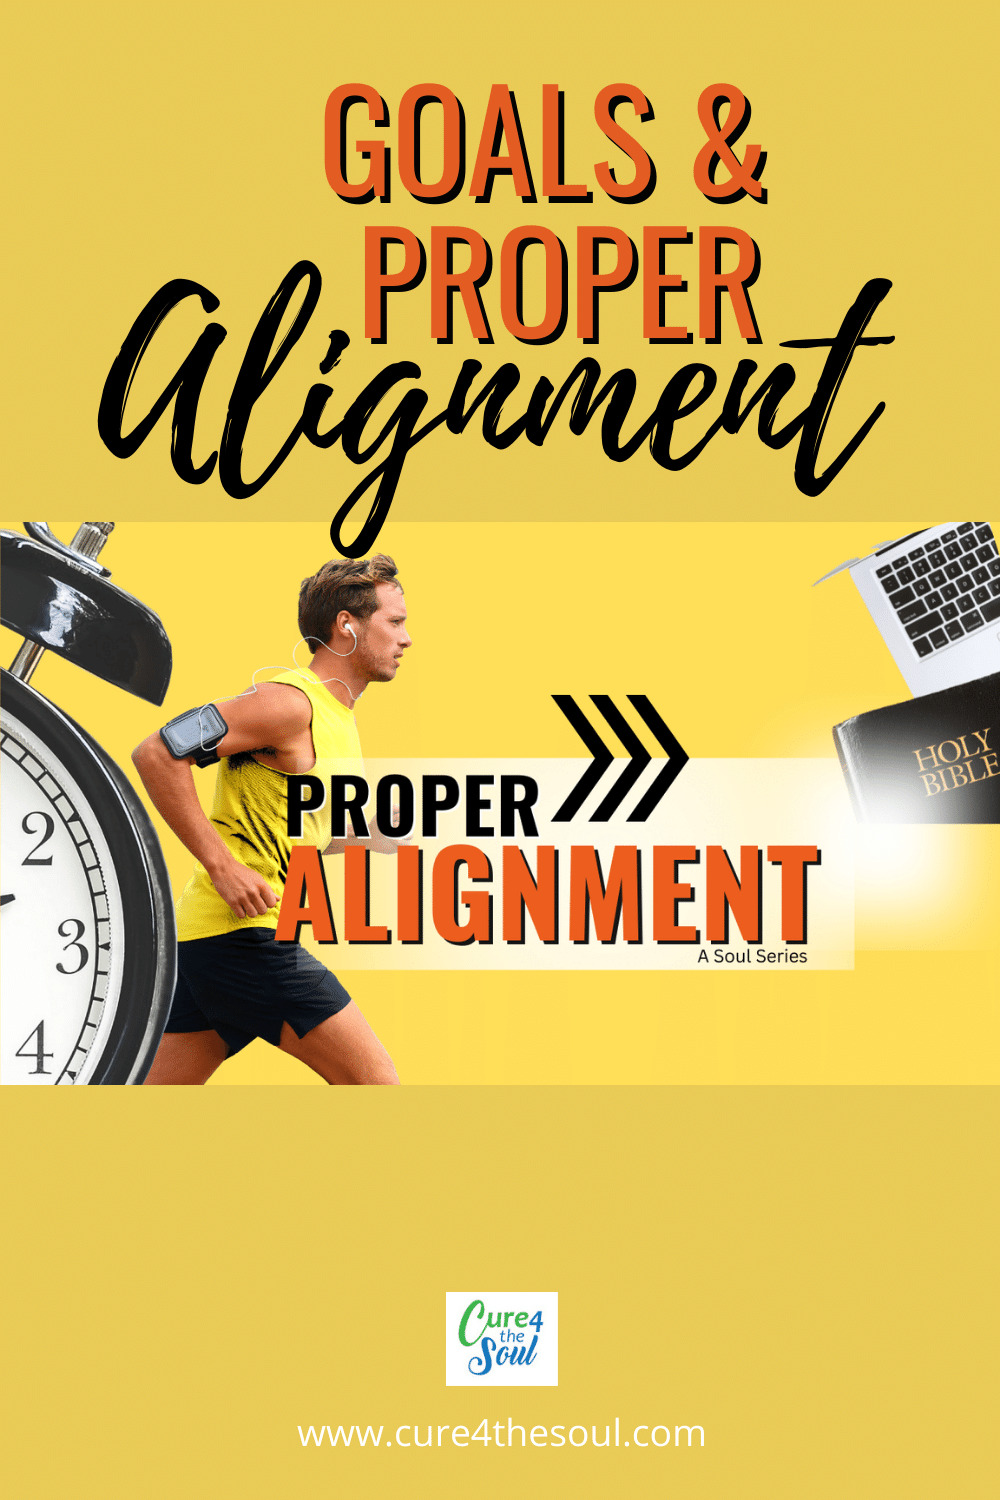 Proper alignment with God's will is critical. Not only does improper alignment throw you and your plans out of whack, but it also affects others who depend on you. #goalsetting #alignment #Christian